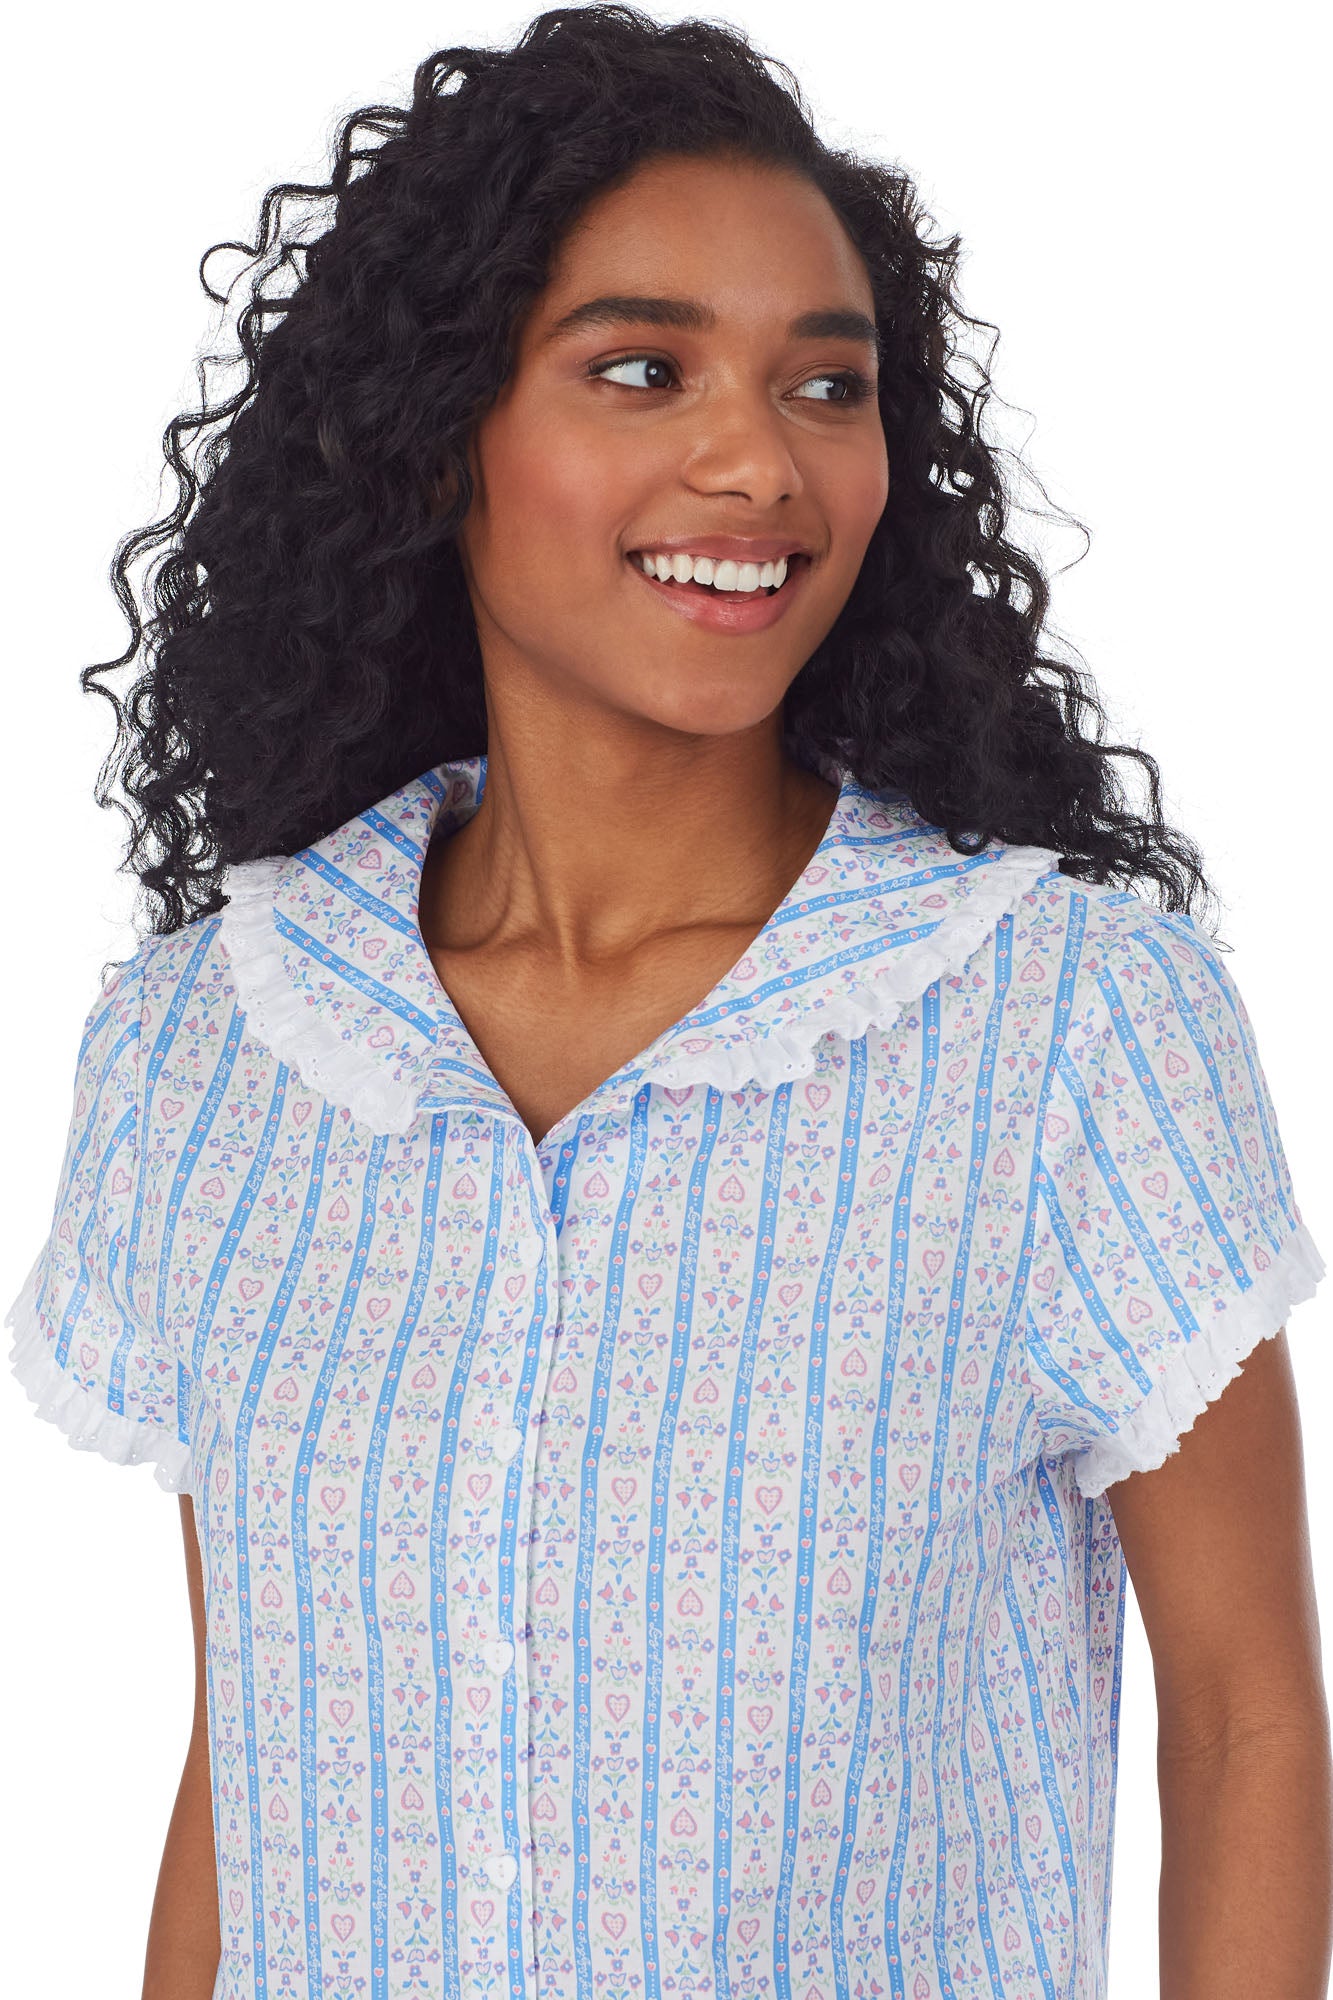 Upper body of A lady wearing white pajama with blue pattern